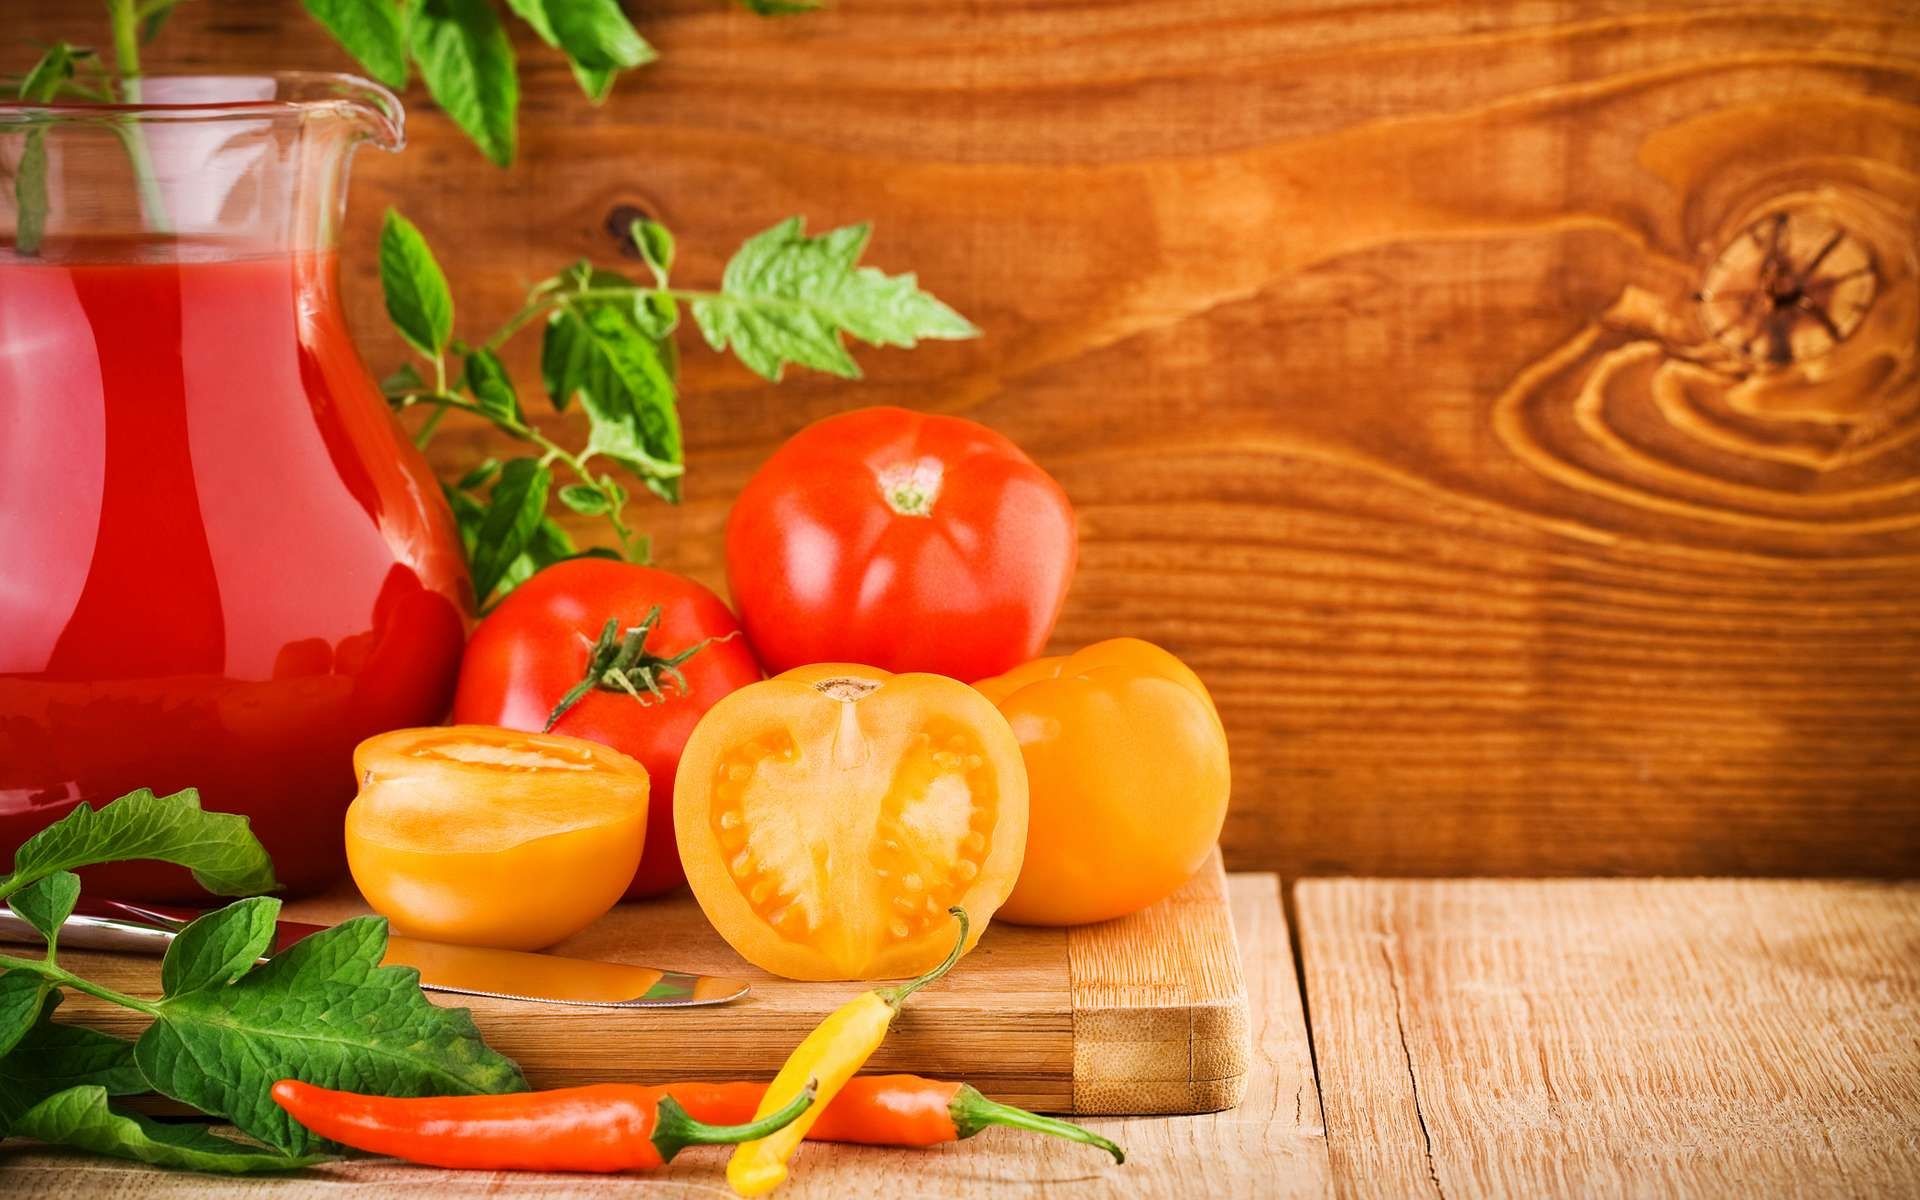 Vegetables: Tomatoes have multiple seeds, which can be harvested to produce new tomato plants. 1920x1200 HD Wallpaper.